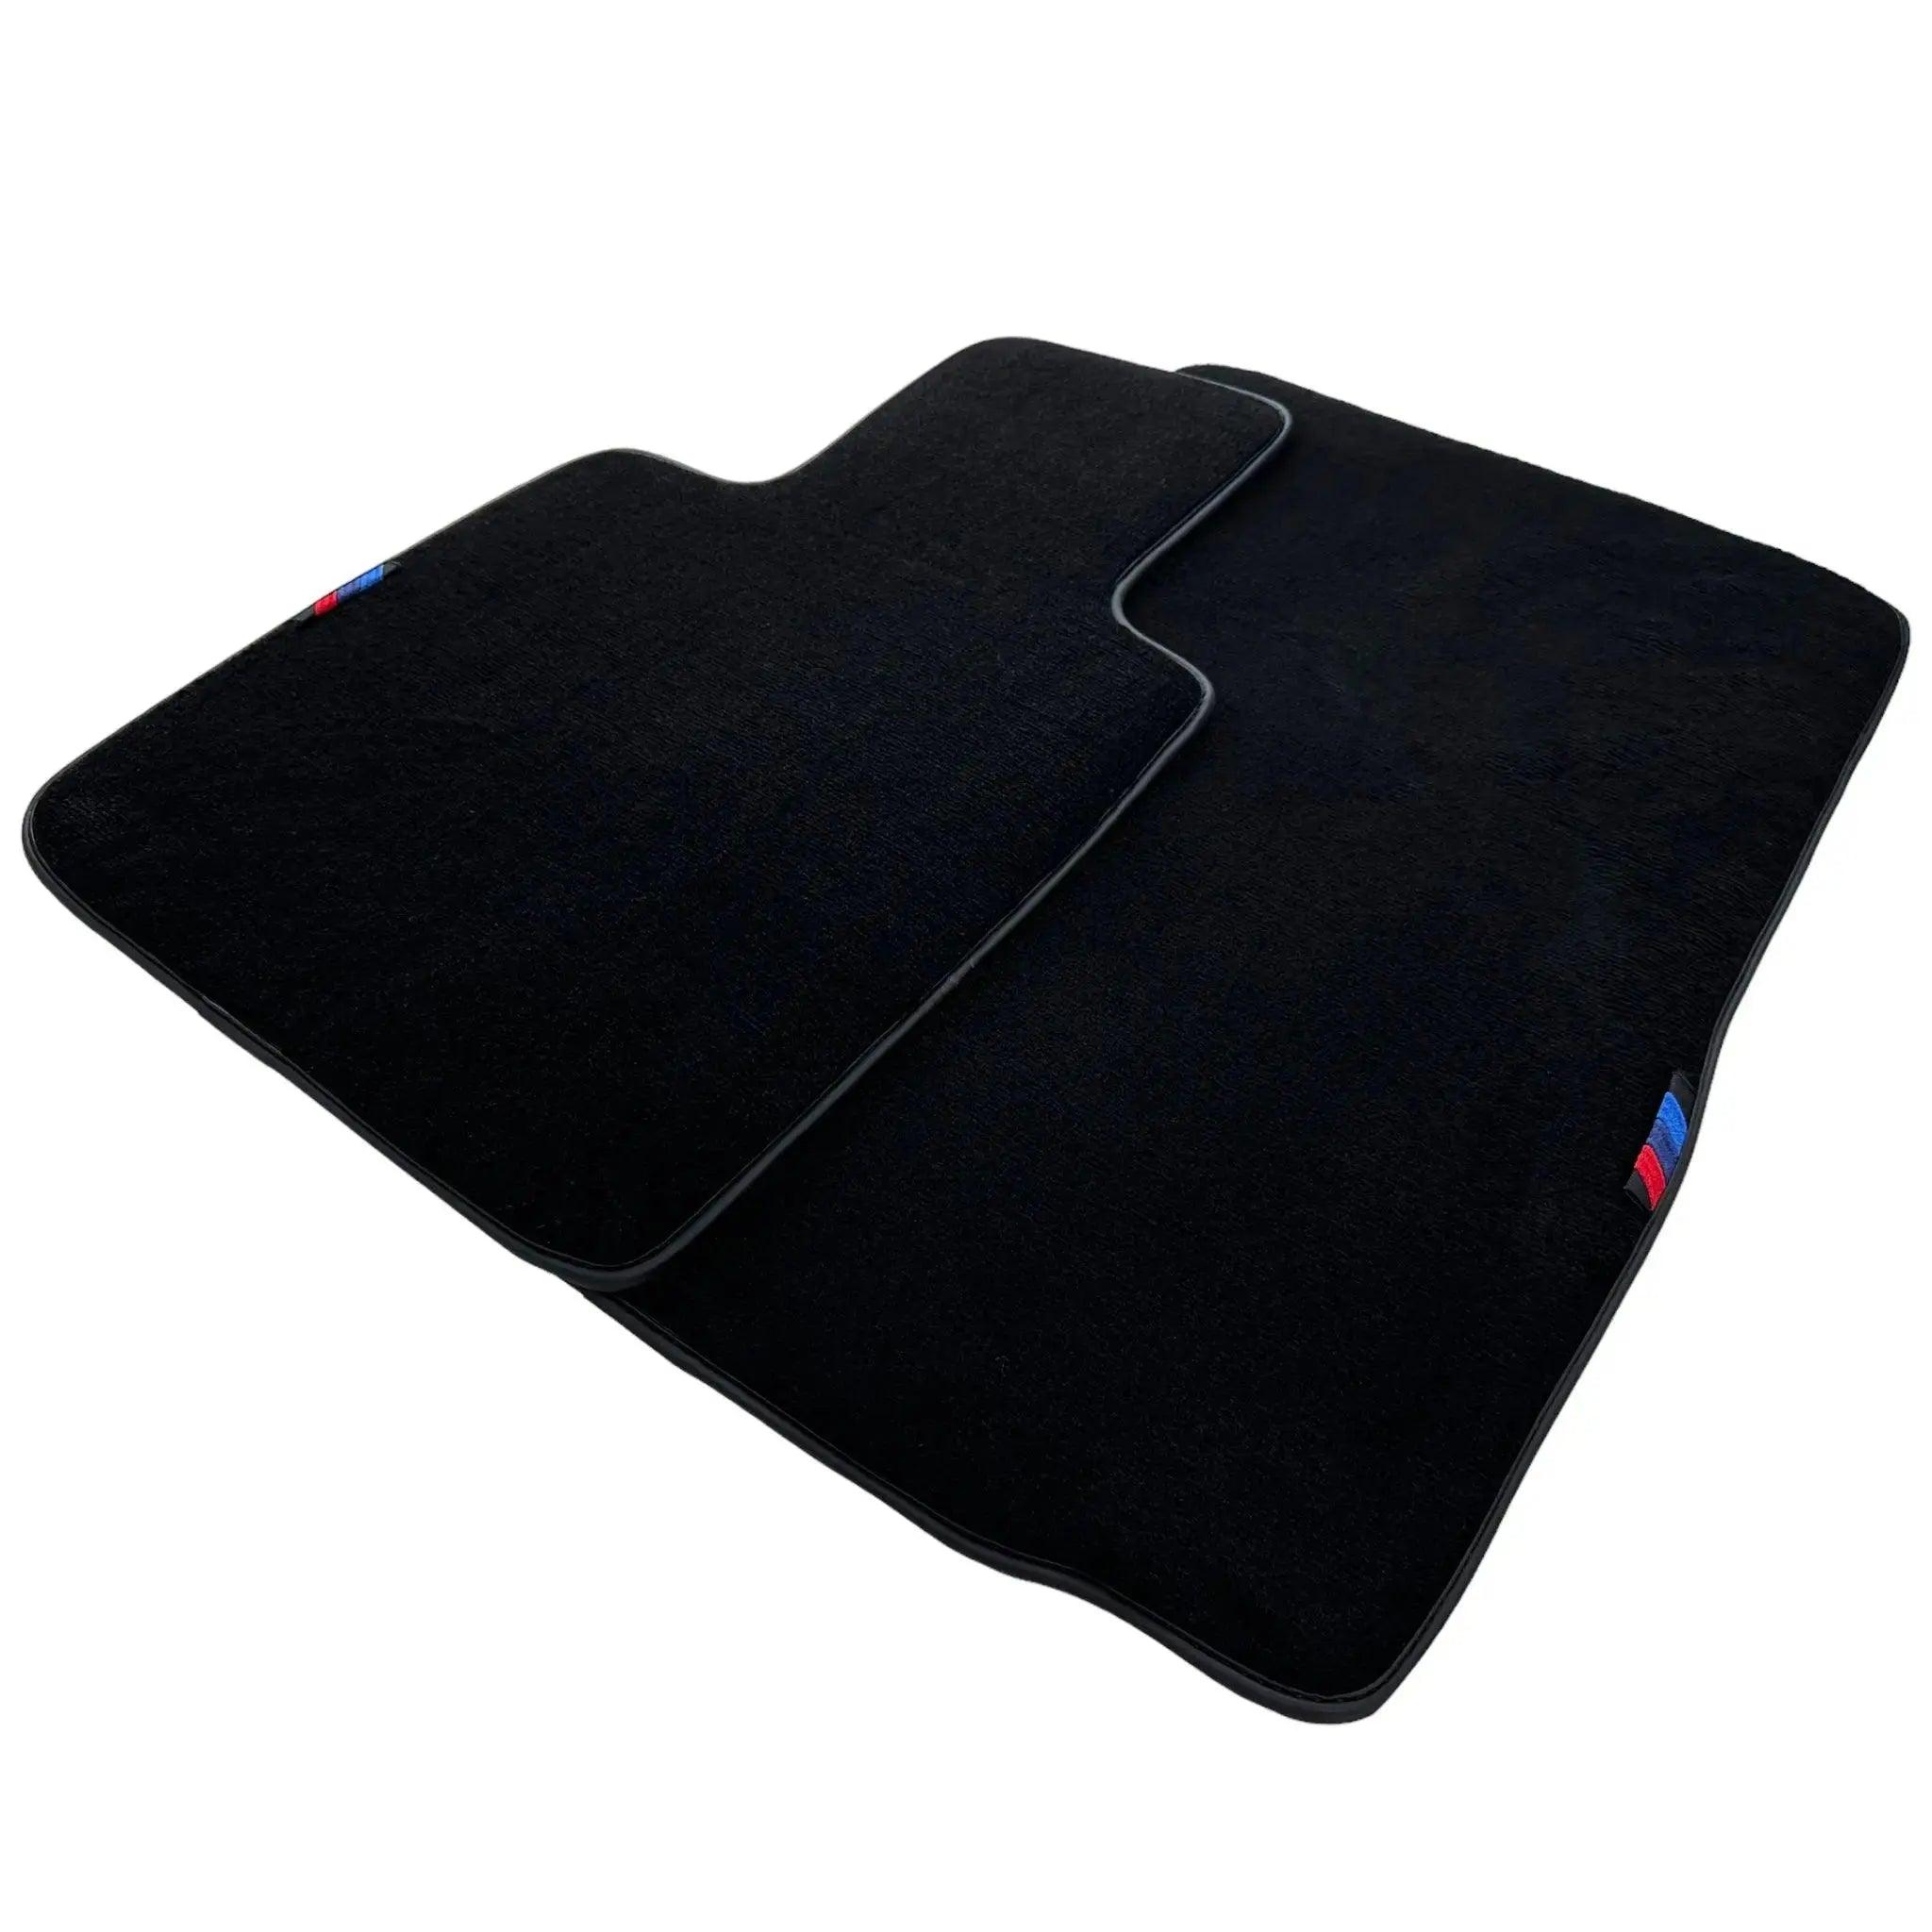 Black Floor Mats For BMW Z4 Series E89 With 3 Color Stripes Tailored Set Perfect Fit